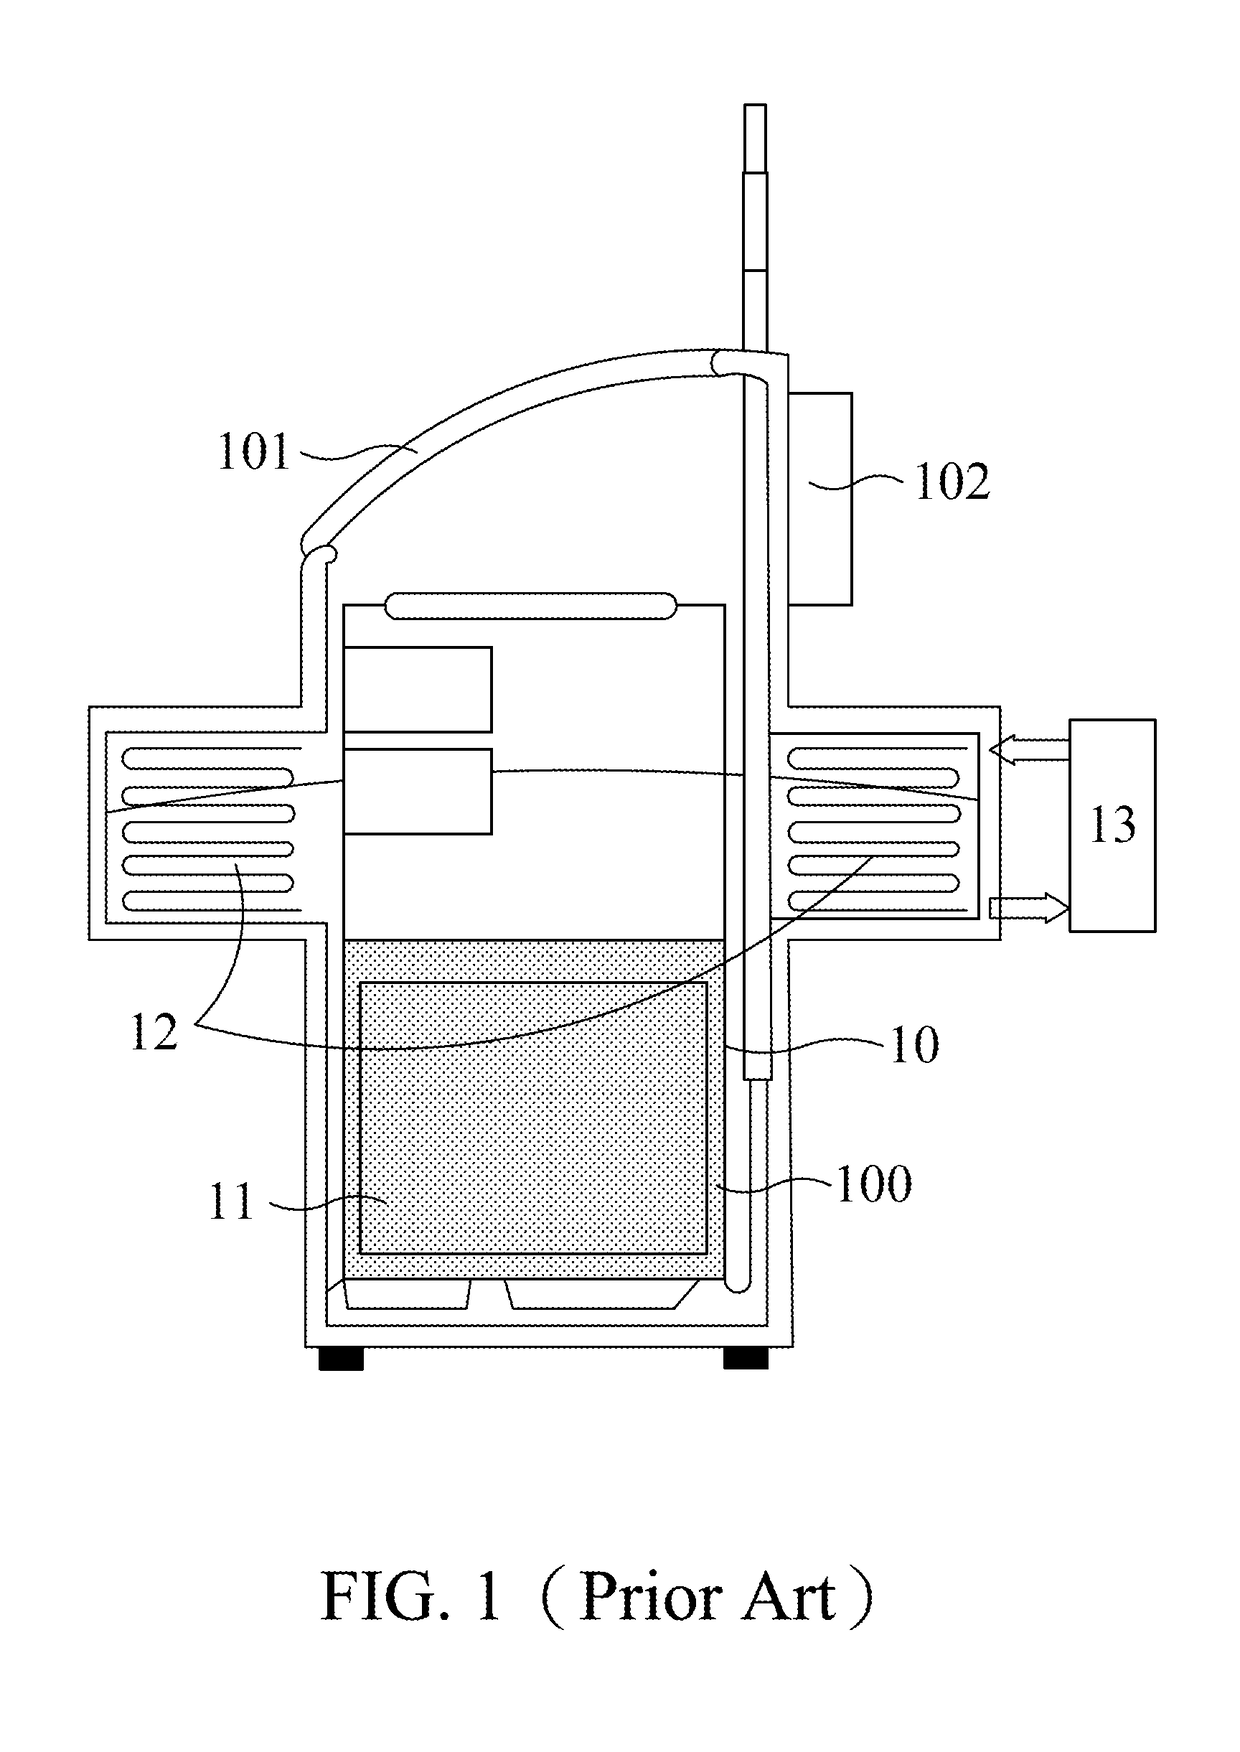 Heat dissipating system